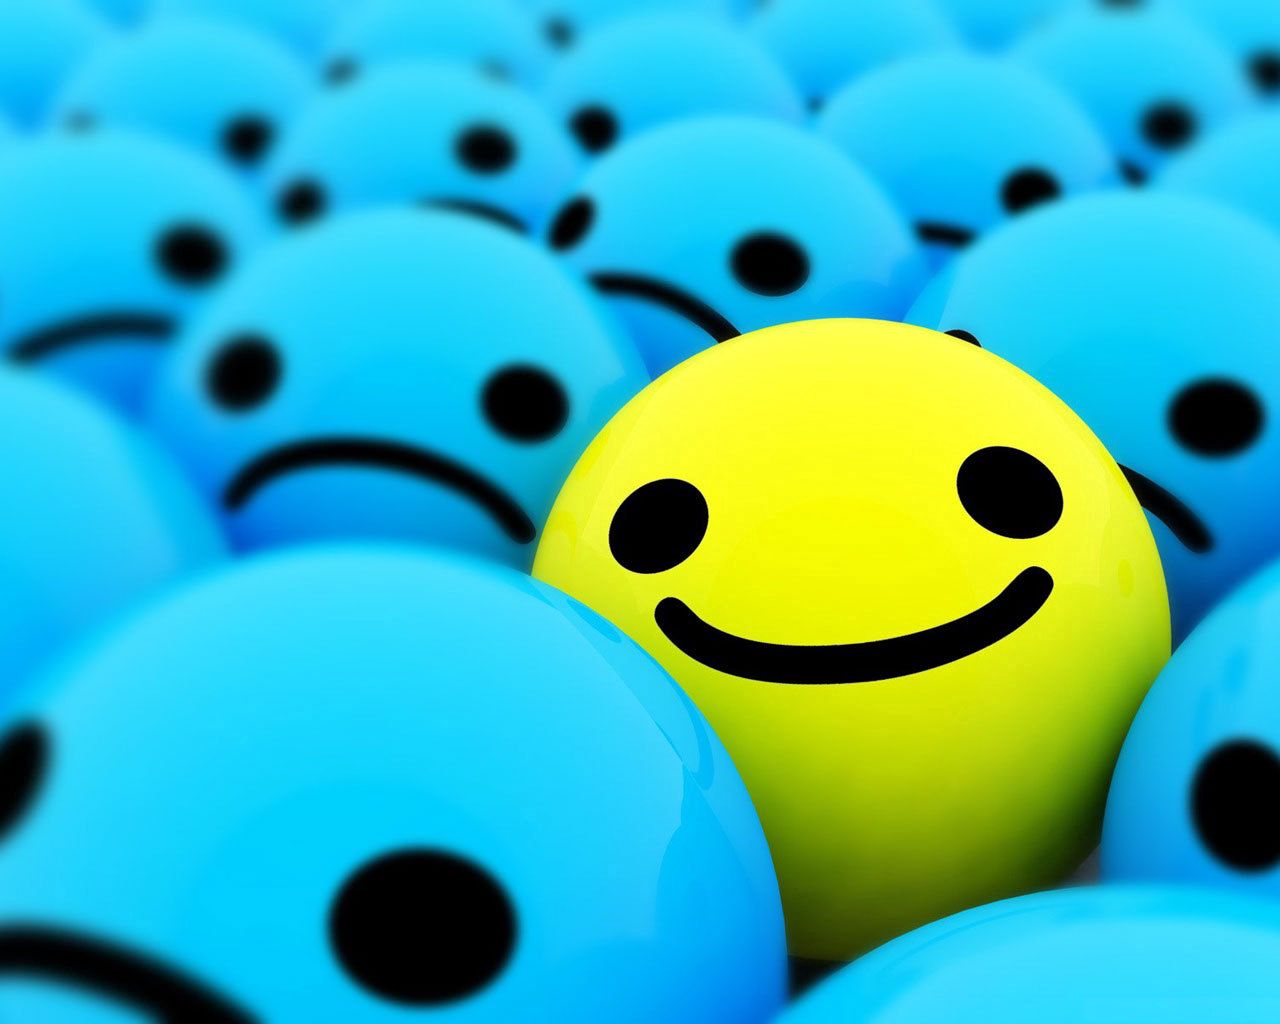 bright, smile, yellow, abstract, blue Full HD